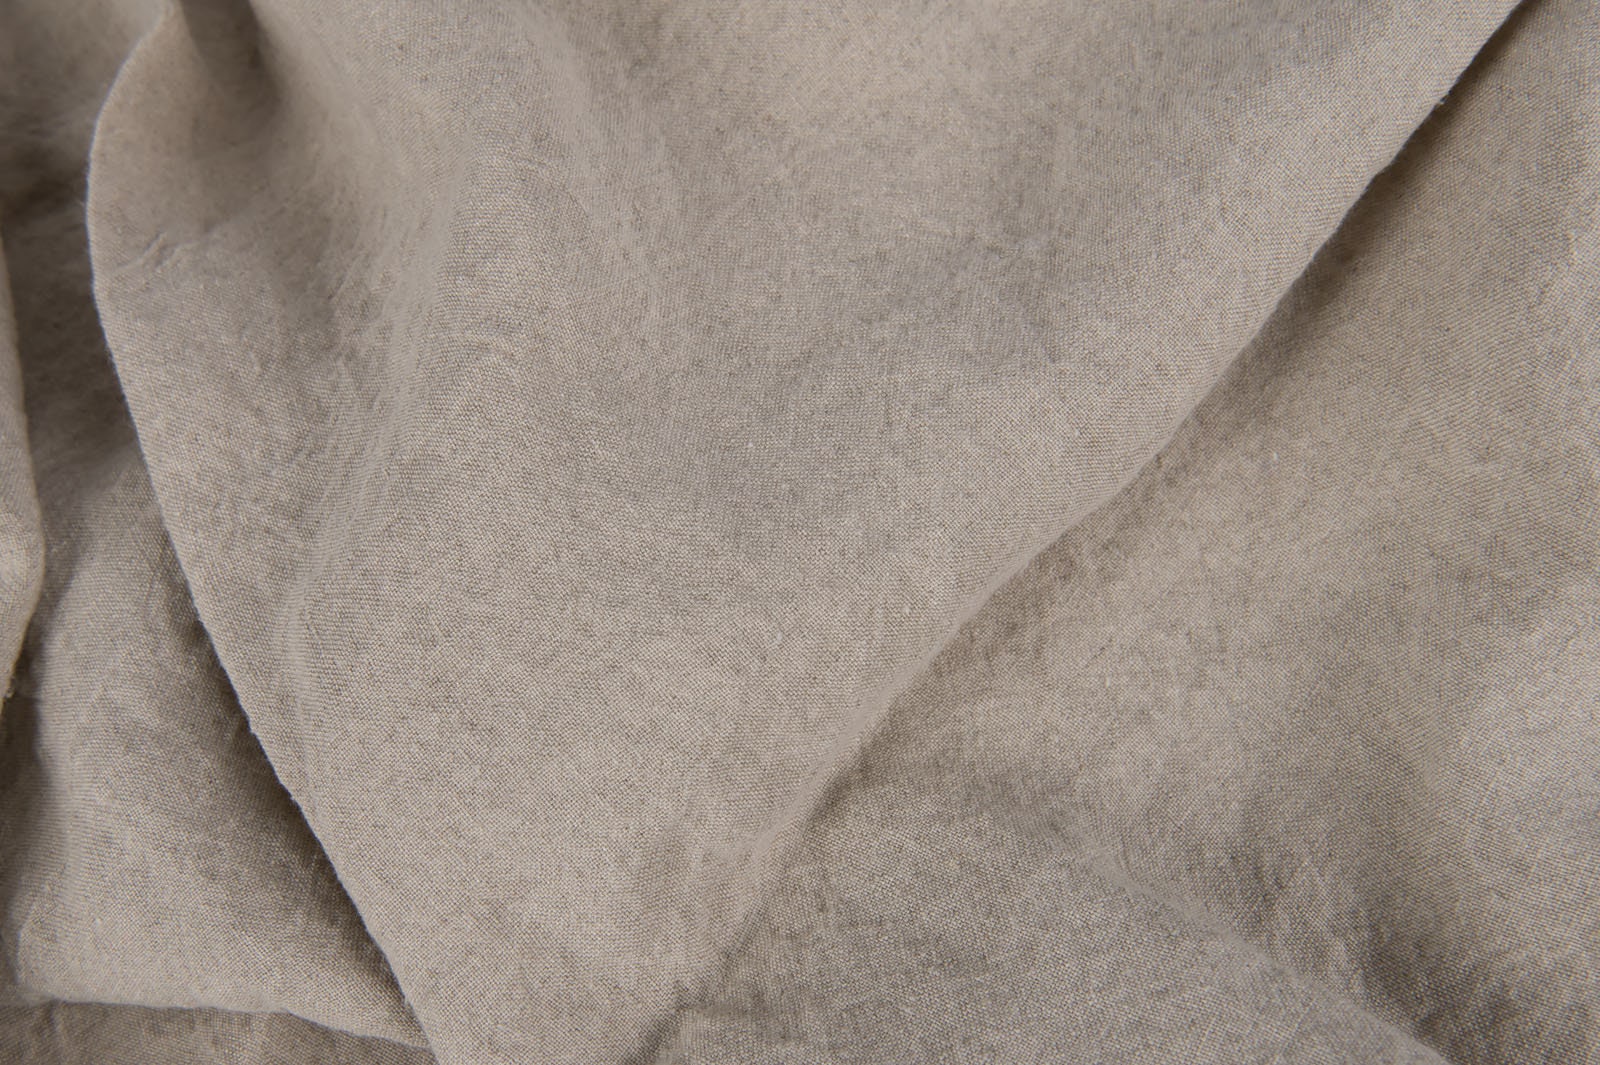 Cotton Canvas Fabric, 160cm (63'') Wide, Sold by the Meter